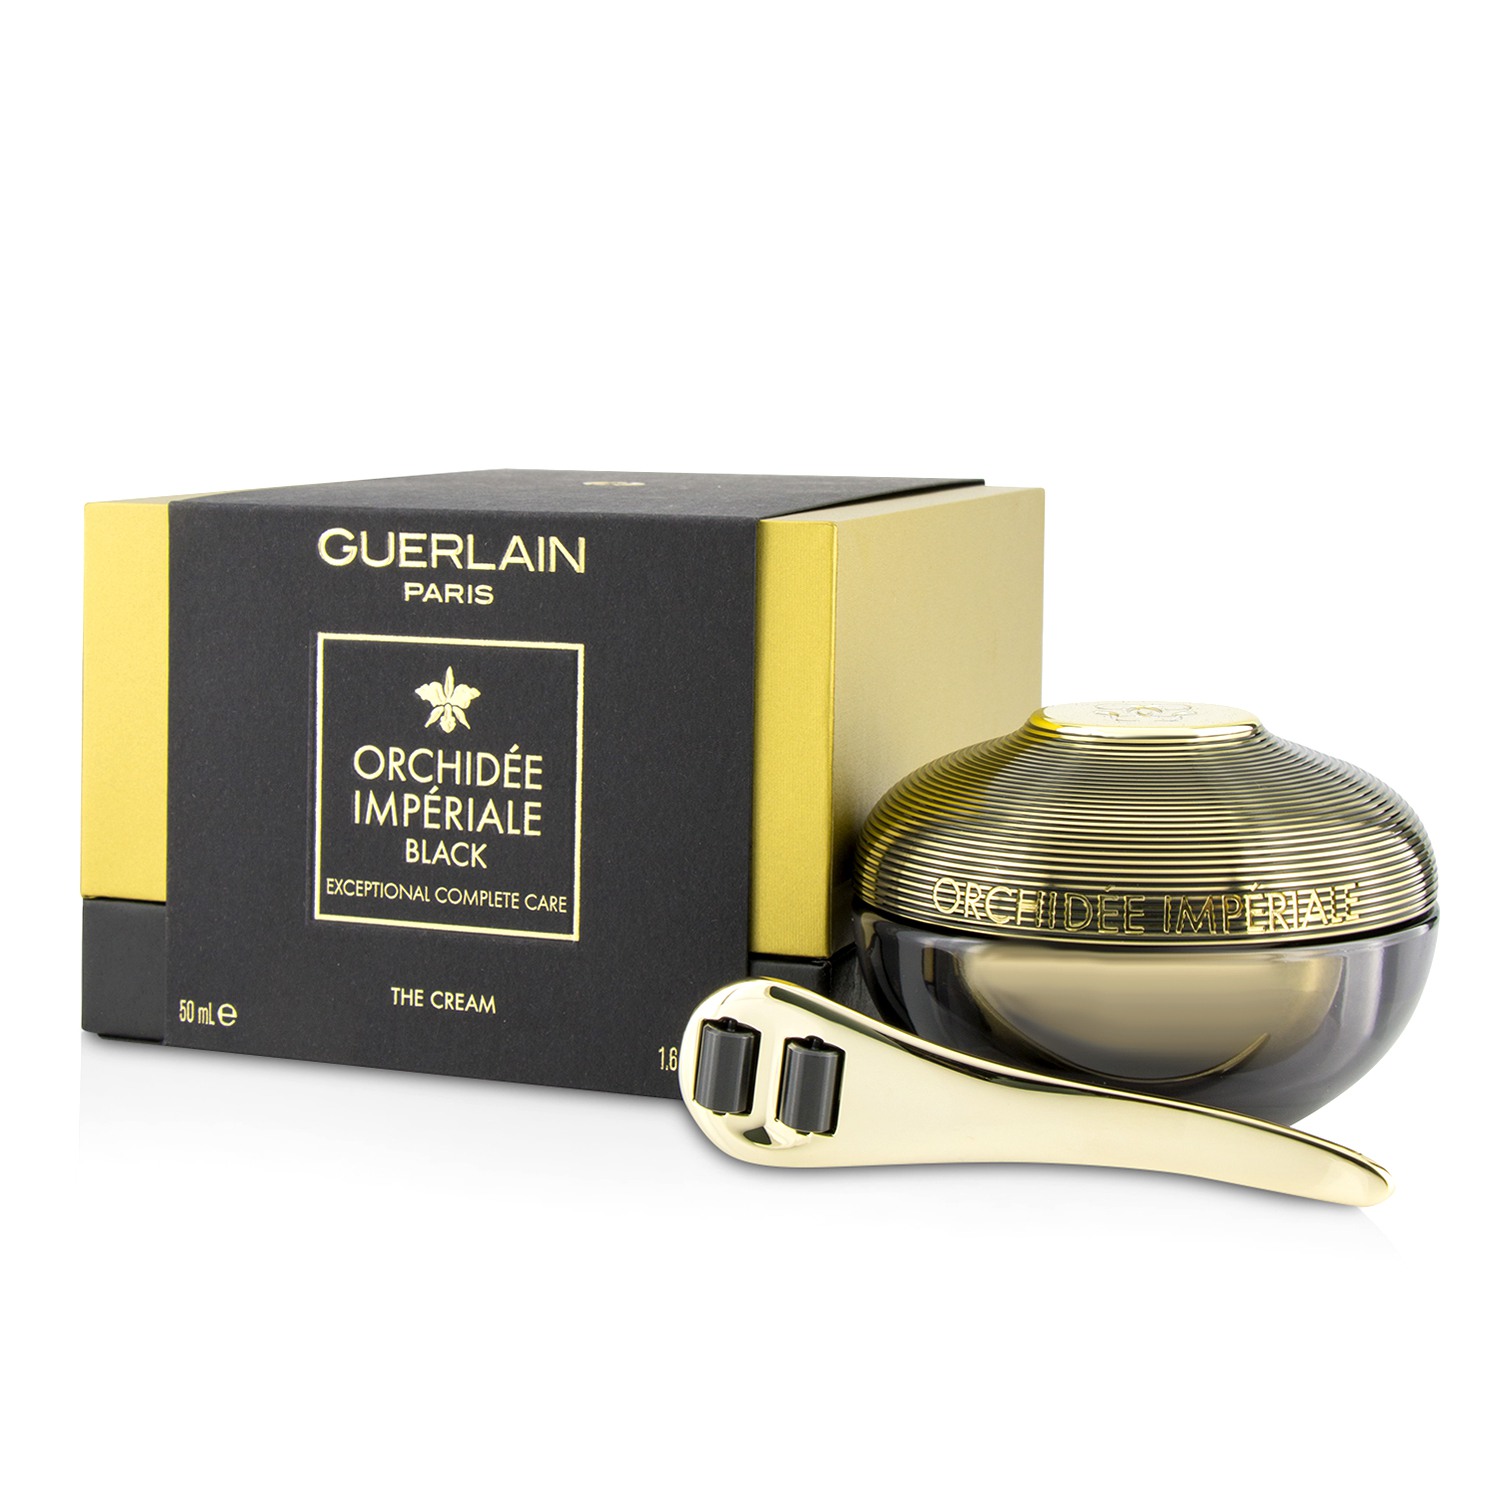 Orchidee Imperiale Black The Cream Guerlain Image